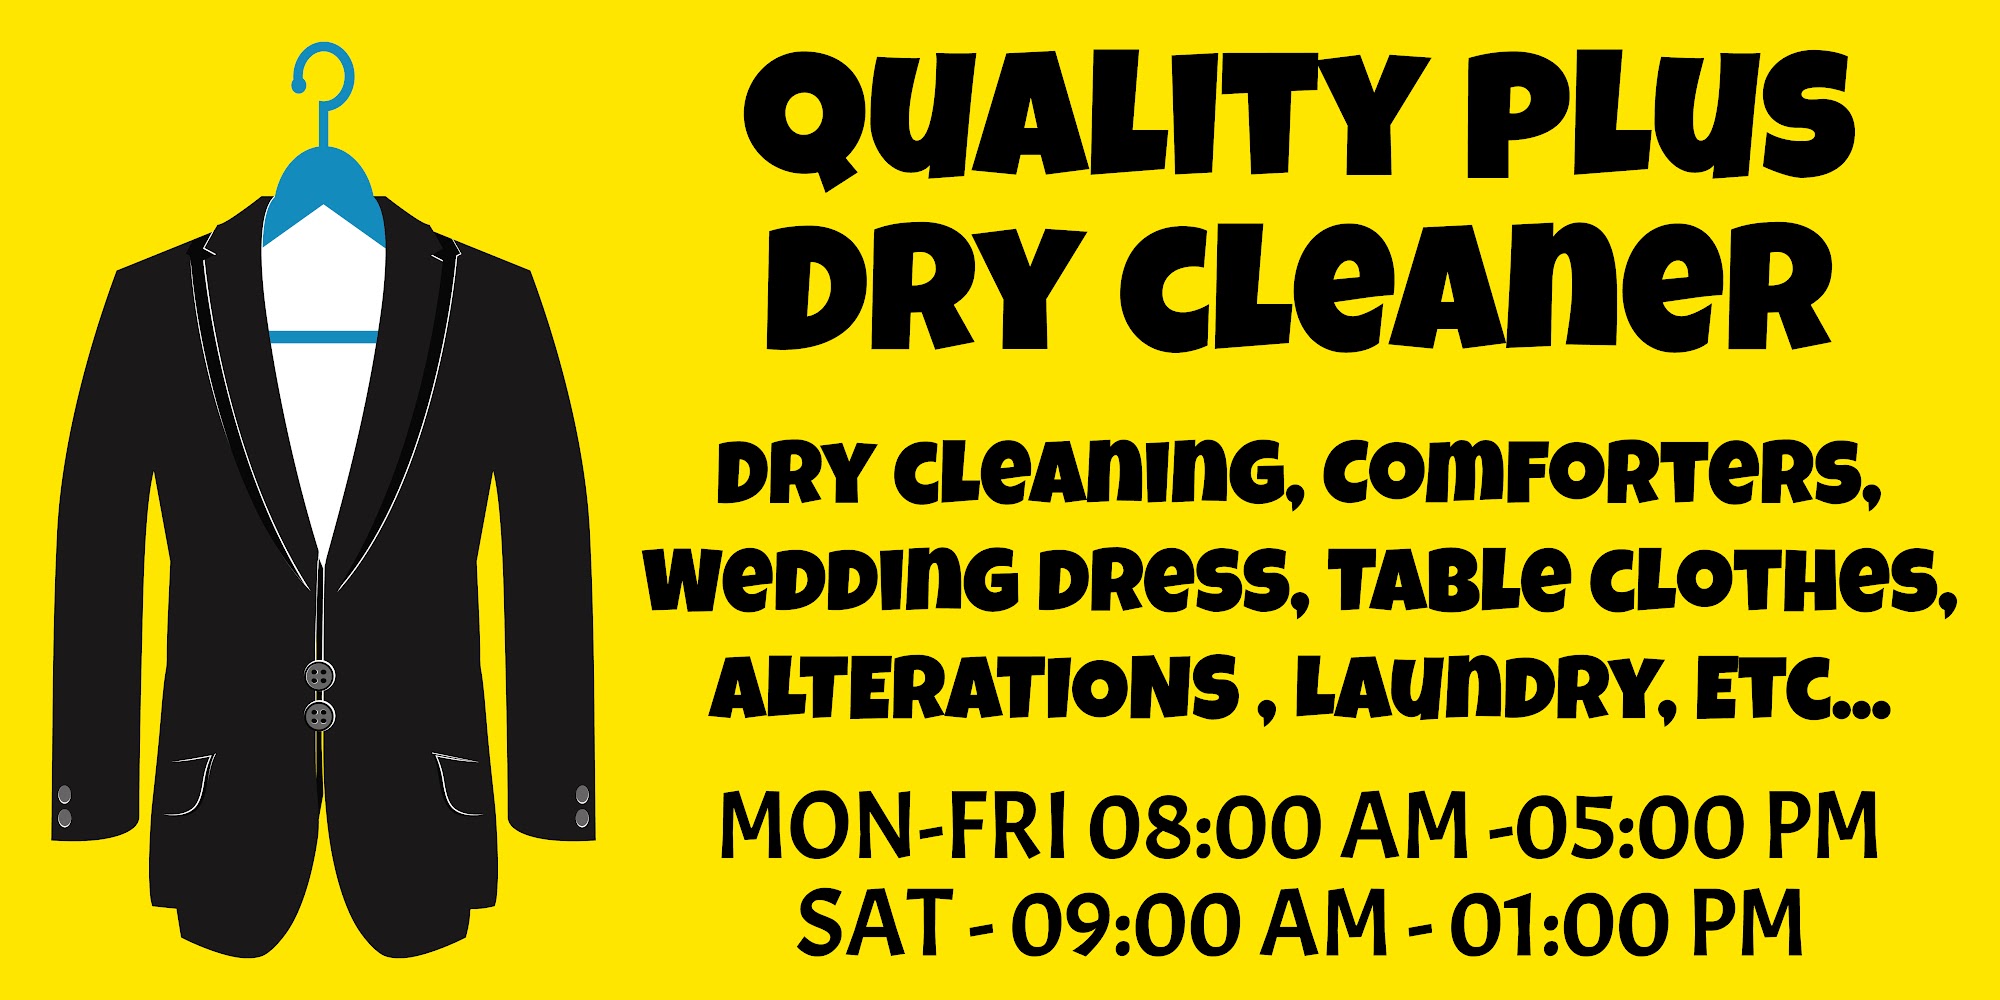 Quality Plus Cleaners 1032 South Broad Street, Clinton South Carolina 29325